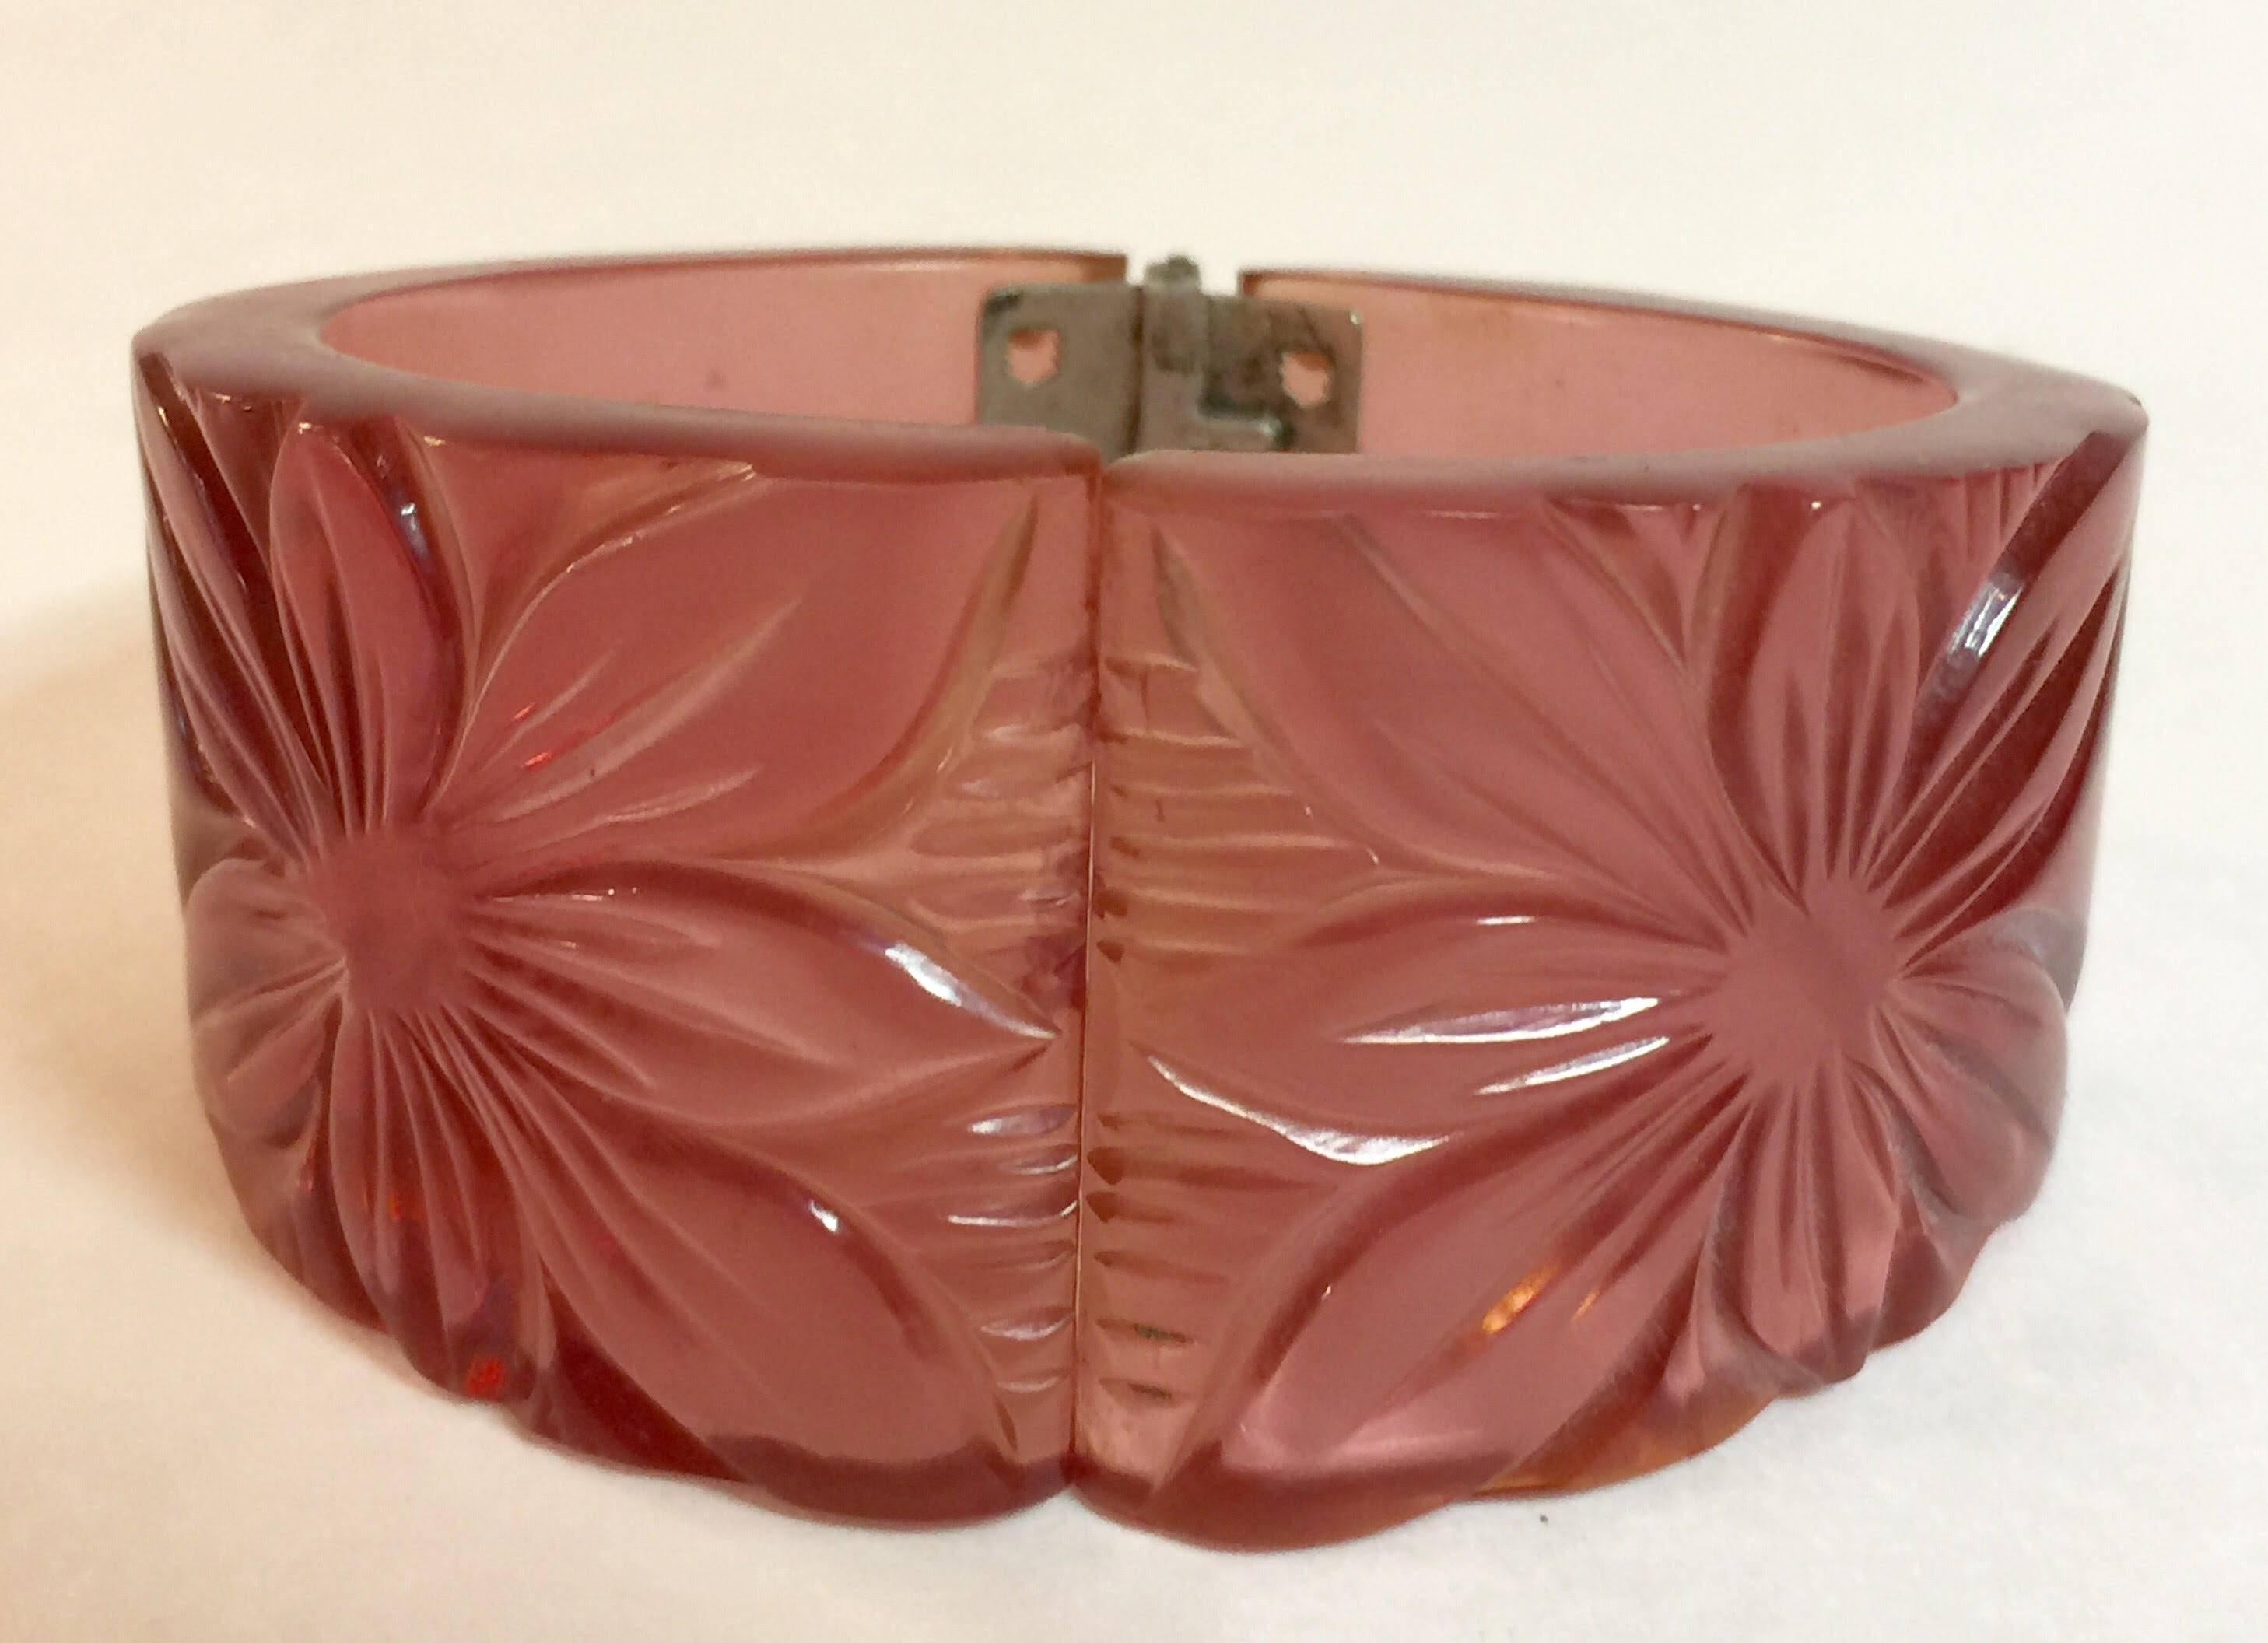 This utterly magical transparent pink floral carved center opening bakelite hinged bracelet is constructed of the rarest dichroic color shifting bakelite anywhere! Period 1930's and hand carved by unknown 1930's carvers, this bracelet is